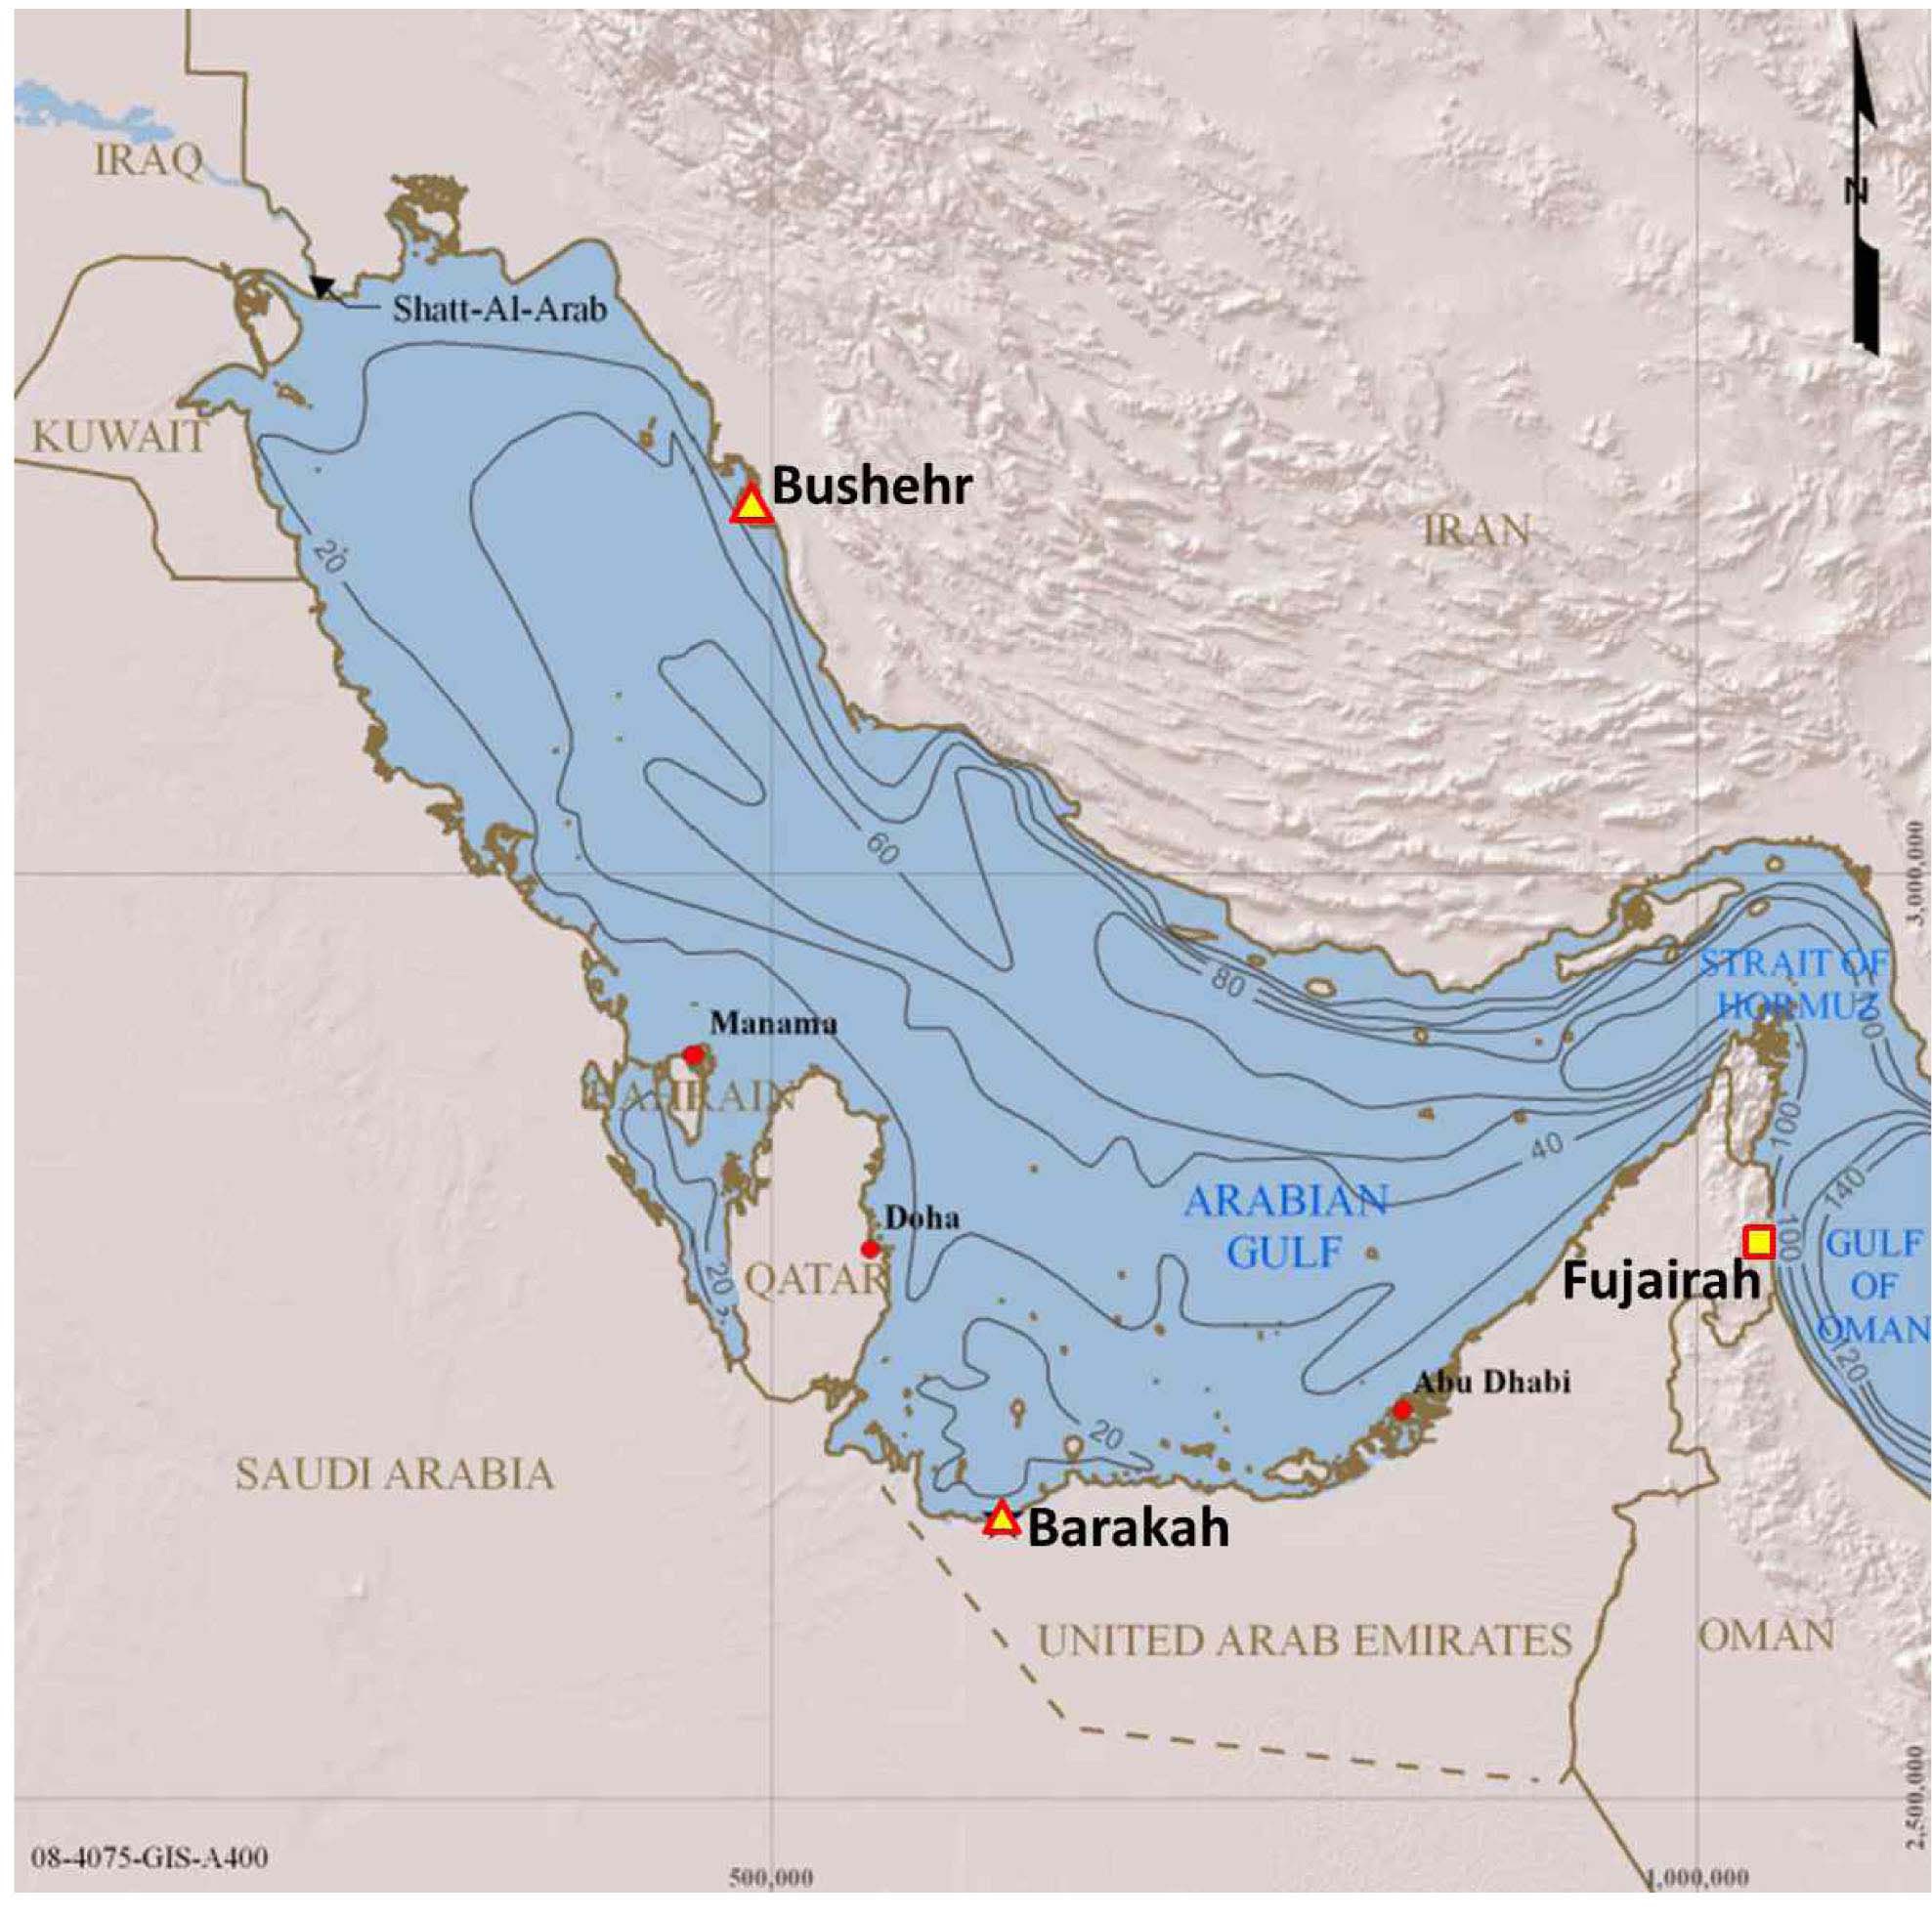 General Bathymetry Map of the Arabian Gulf, with Bushehr
(Northern Shore) and Barakah (Southern Shore) NPPs (Reference: ESRI 2008, World Shaded Relief Imagery, June 2008)